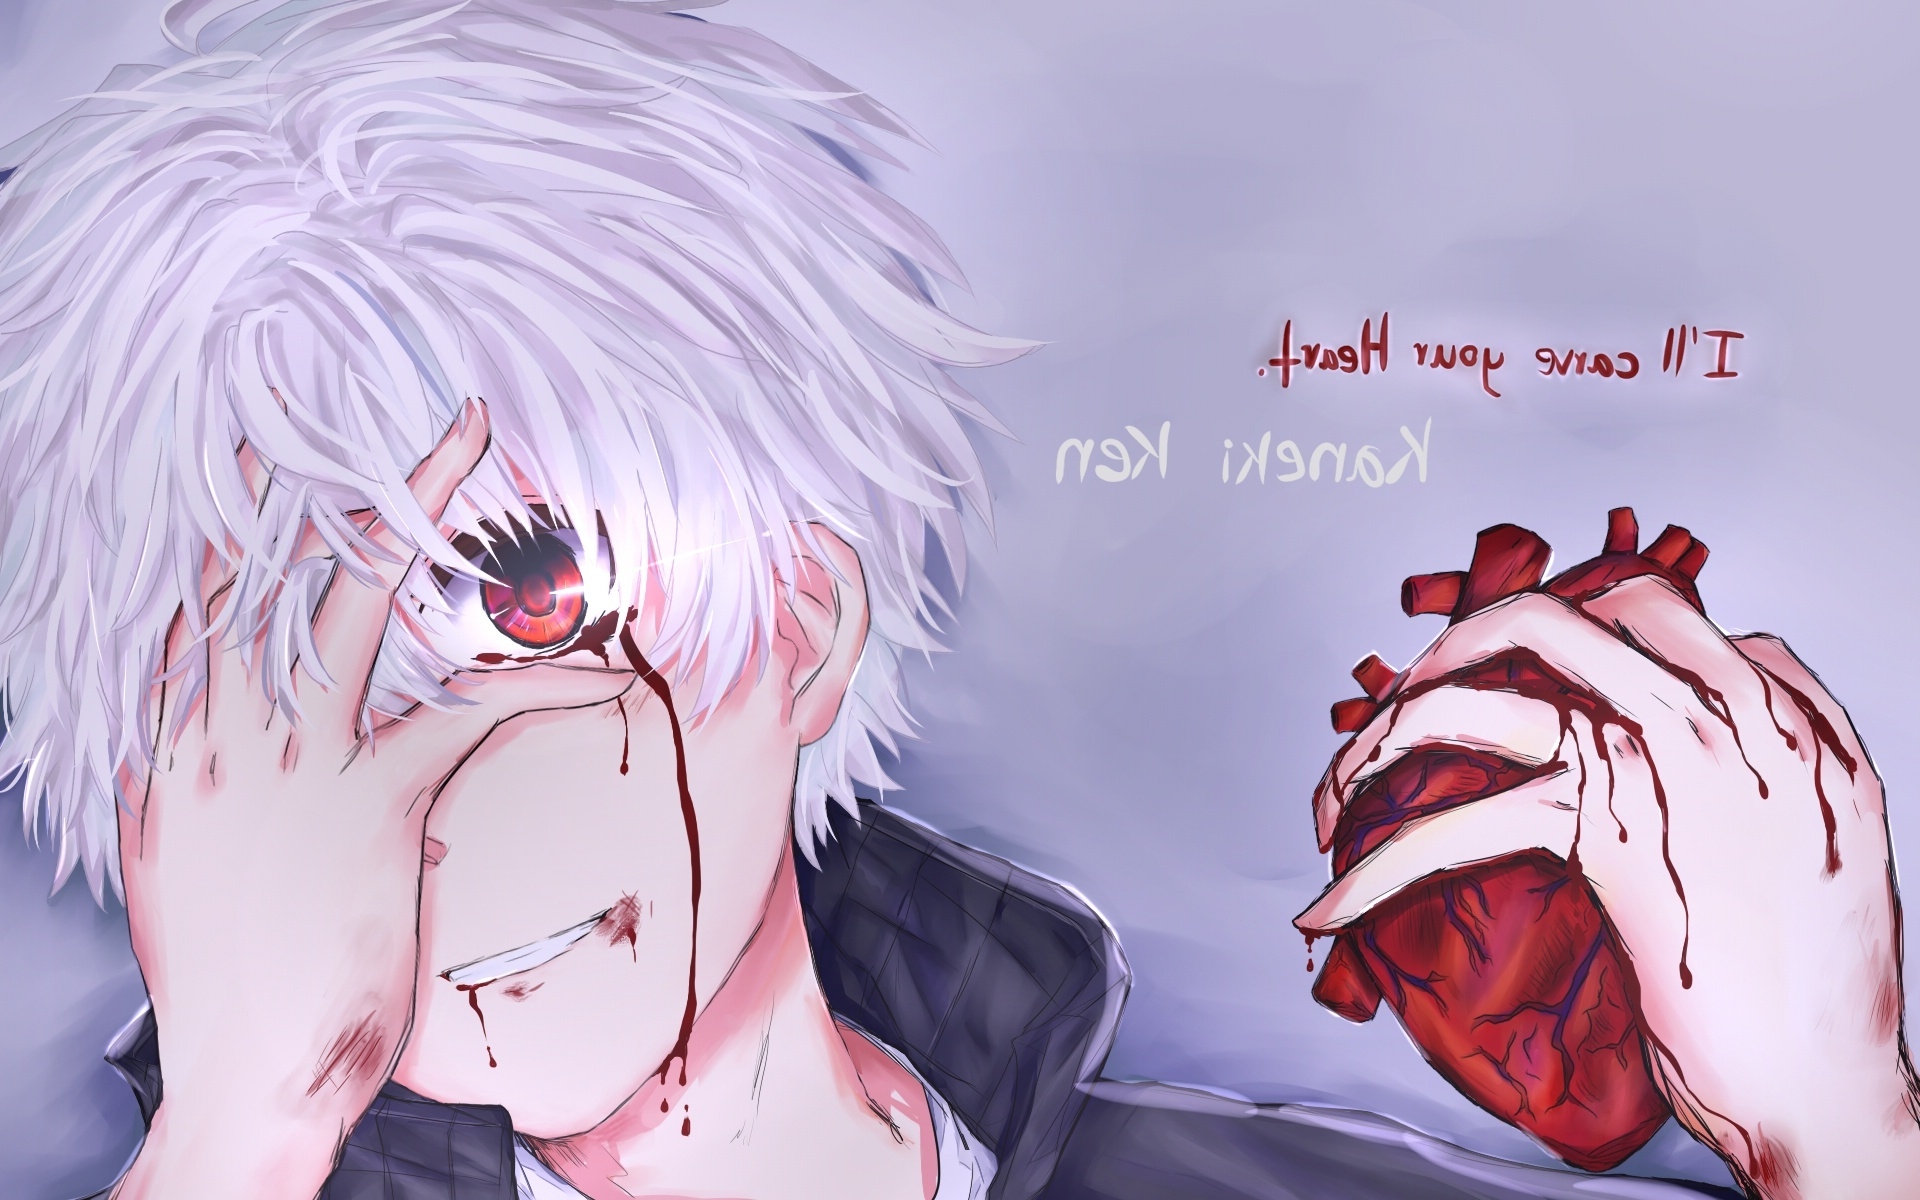 Wallpaper Tokyo Ghoul, anime HD 1920x1200 HD Picture, Image